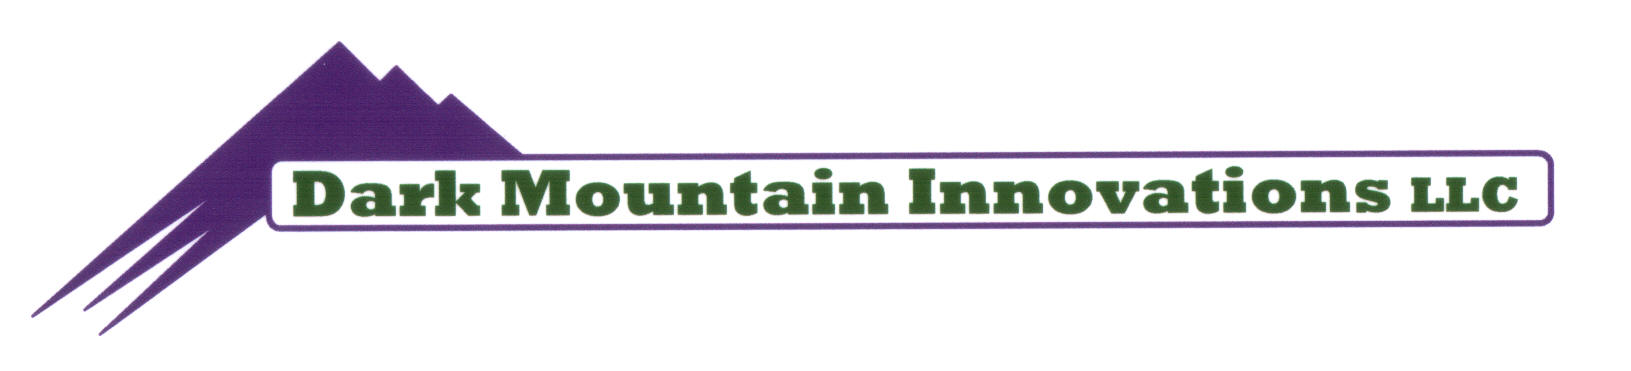 Dark Mountain Innovations, LLC Home Page